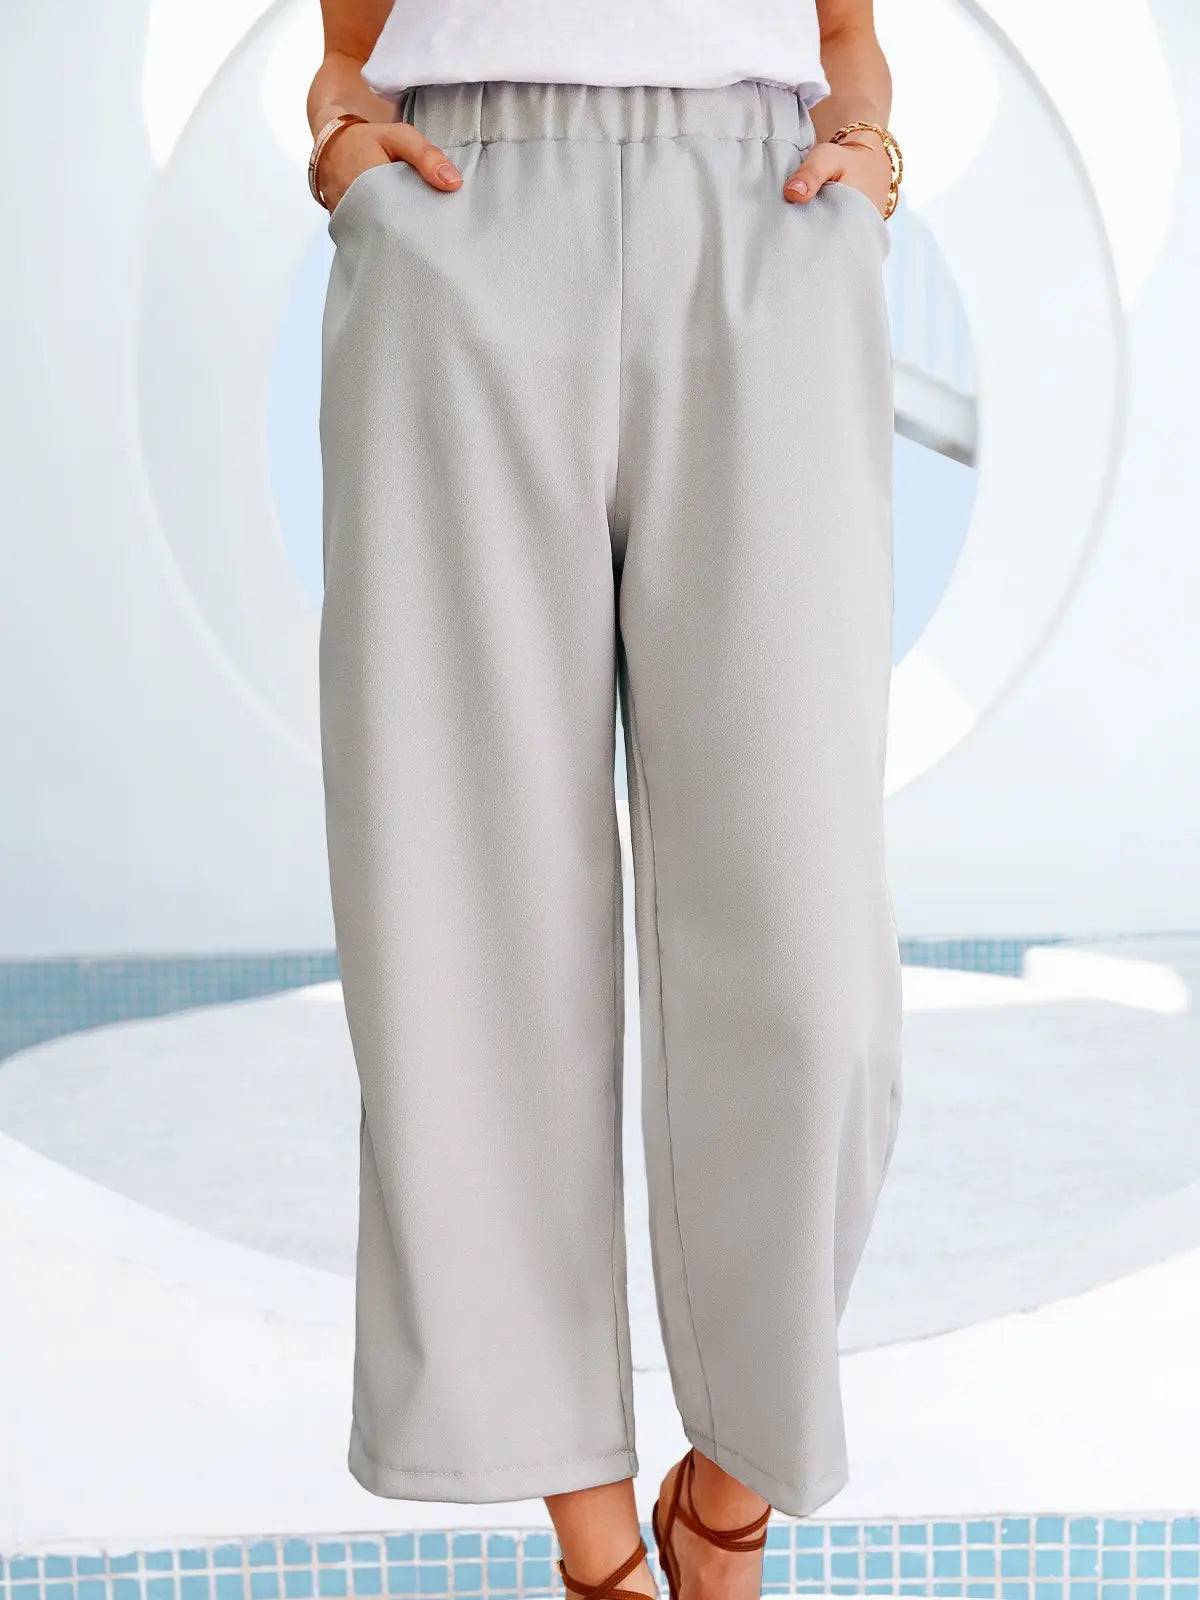 Hot-selling cotton and linen casual solid color straight-leg pants women mysite